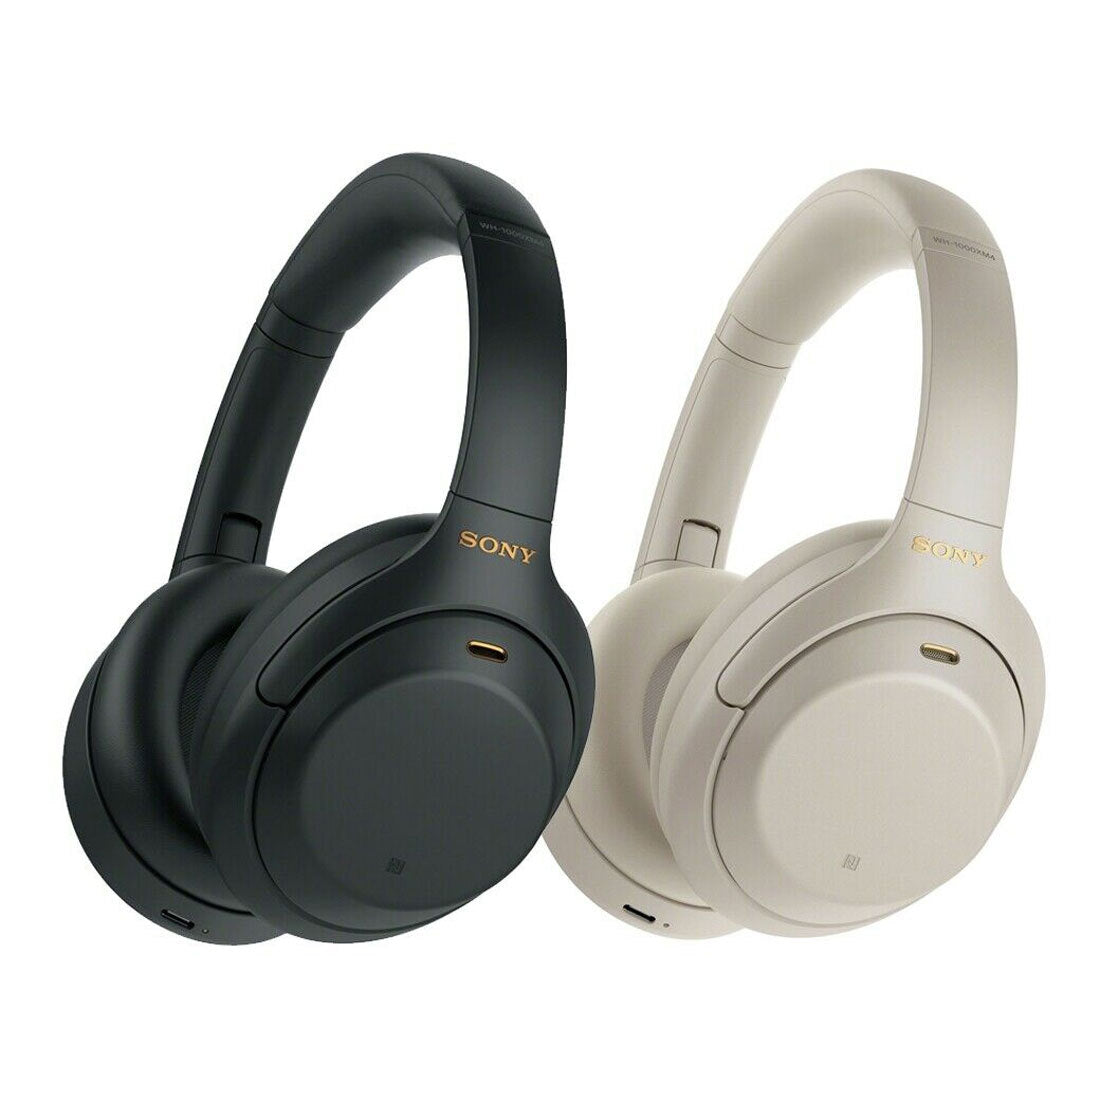 Sony Wireless Noise Canceling Overhead Headphones with Mic for Phone-Call and Alexa Voice Control WH-1000XM4- Silver